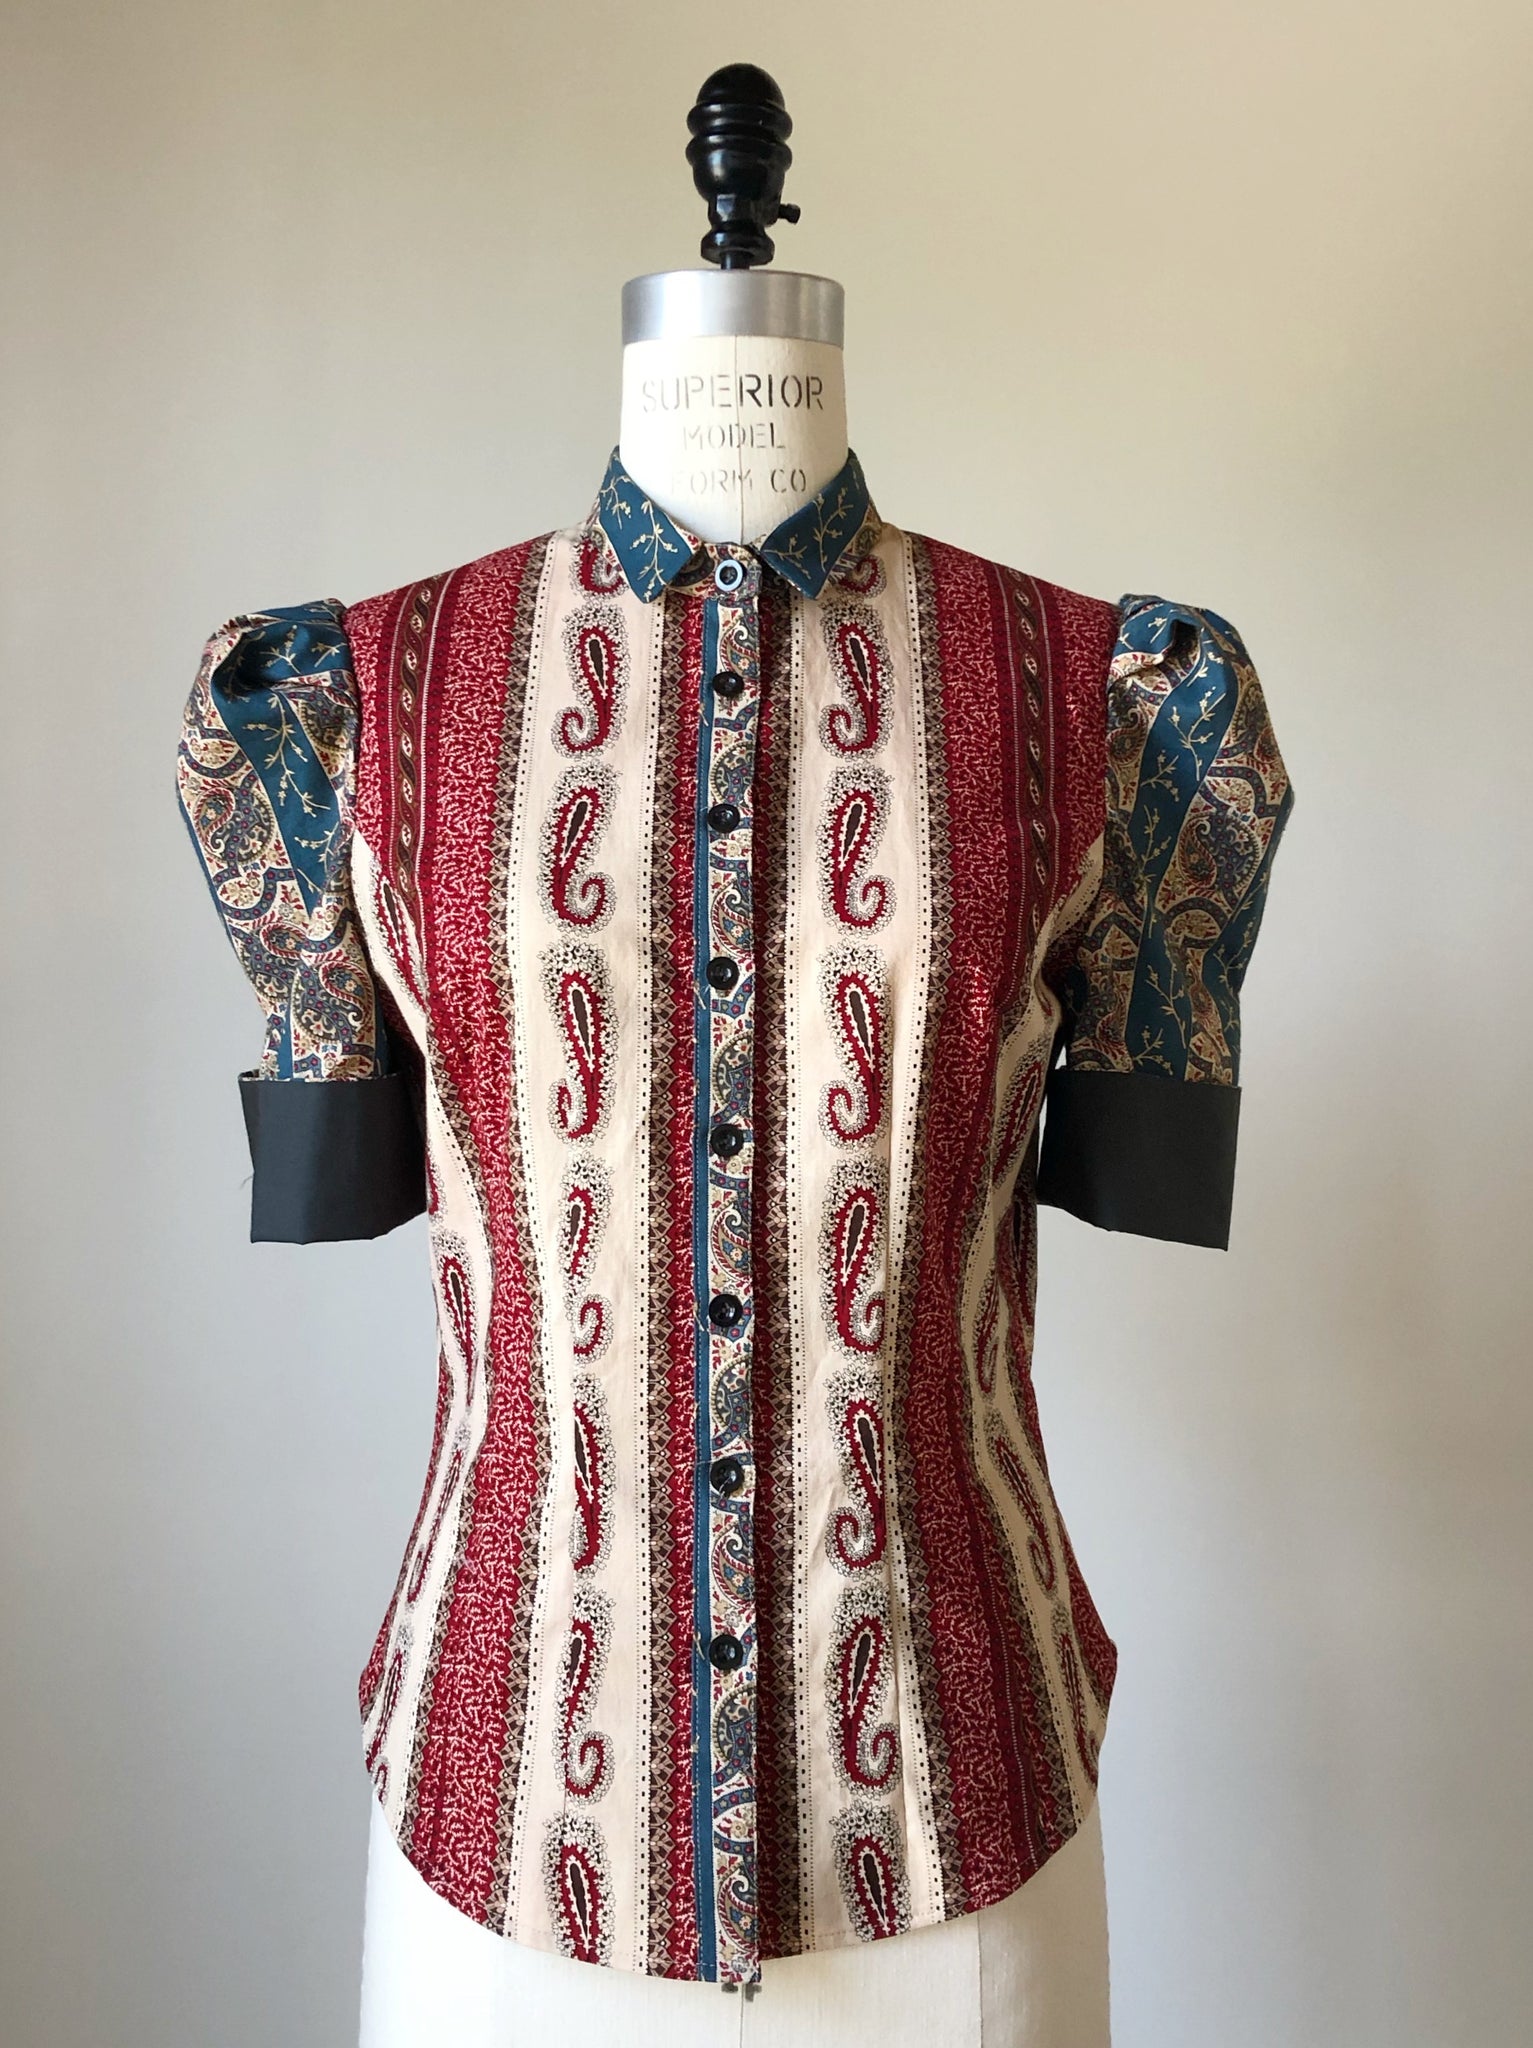 Lillian work shirt in 19th century reproduction prints #3